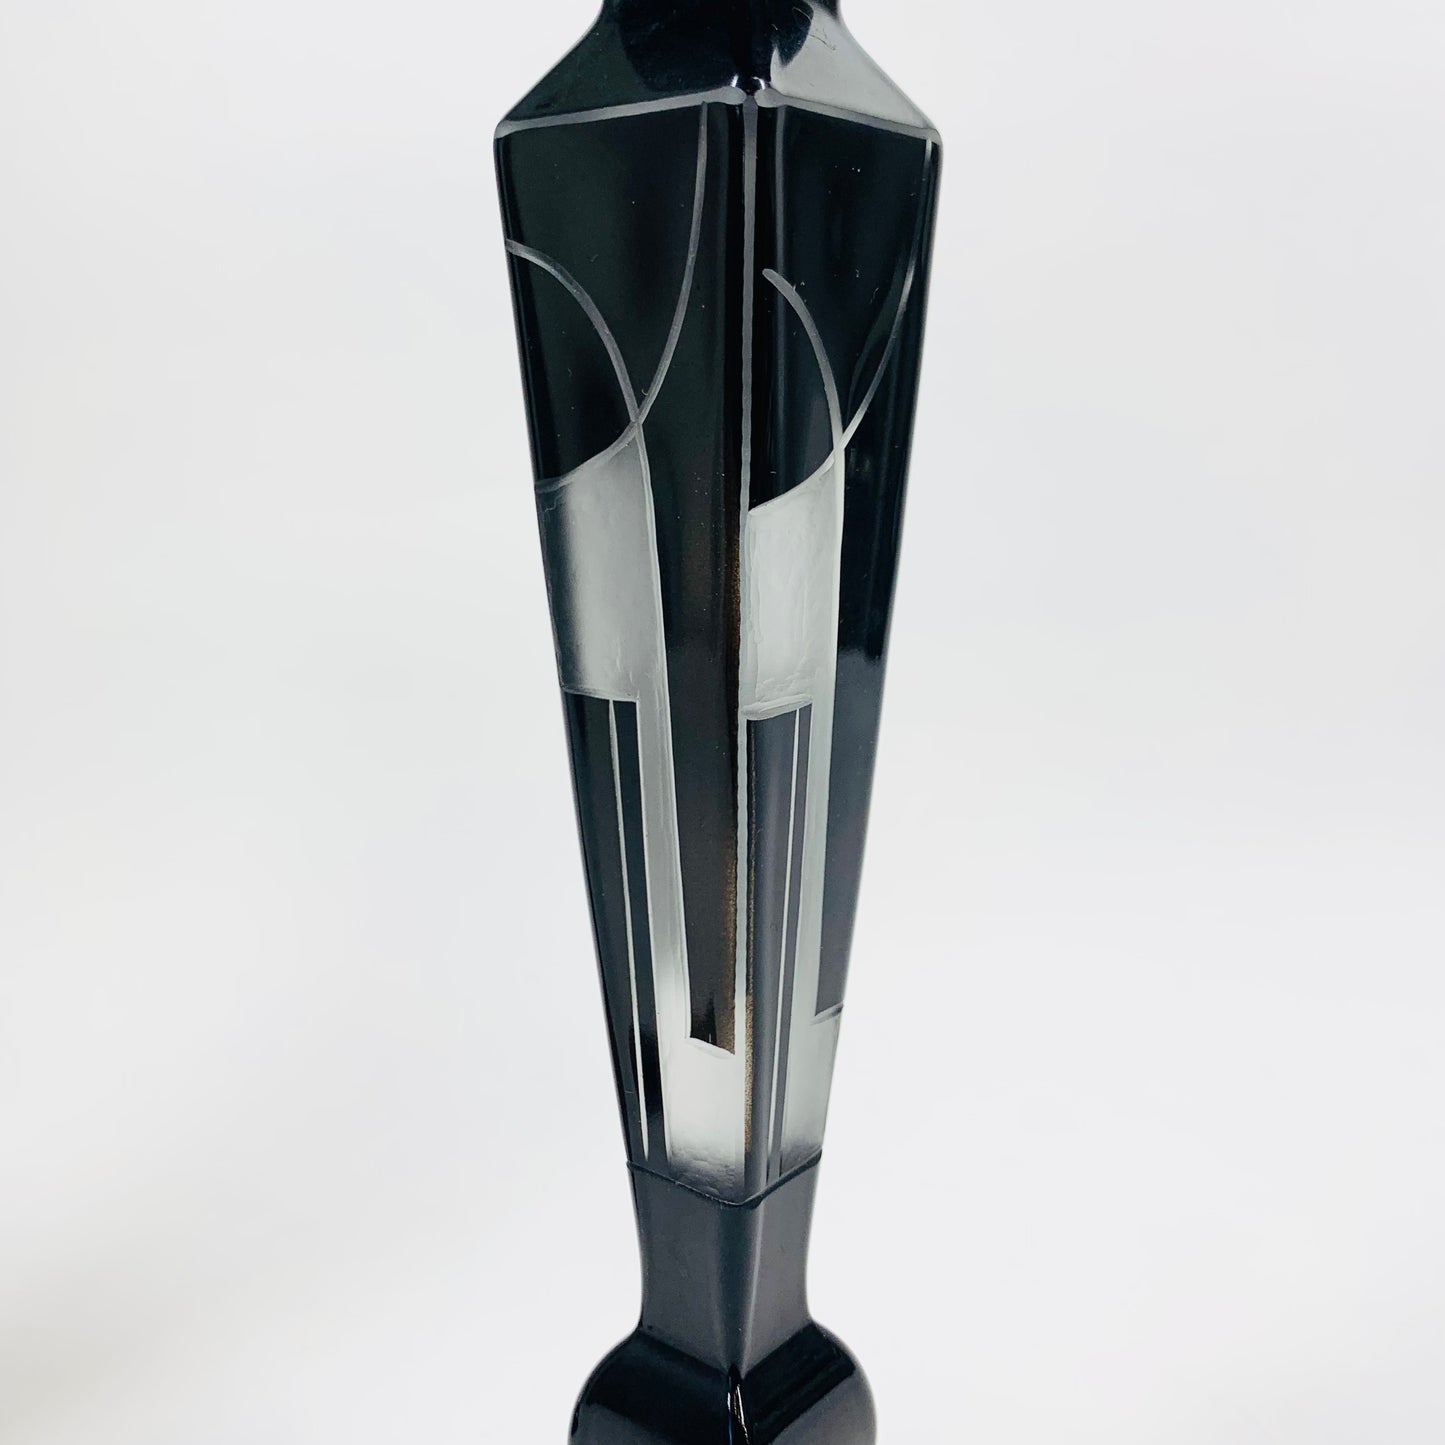 Extremely rare antique Art Dece black enamel frosted glass silver candle sticks by Karl Palda